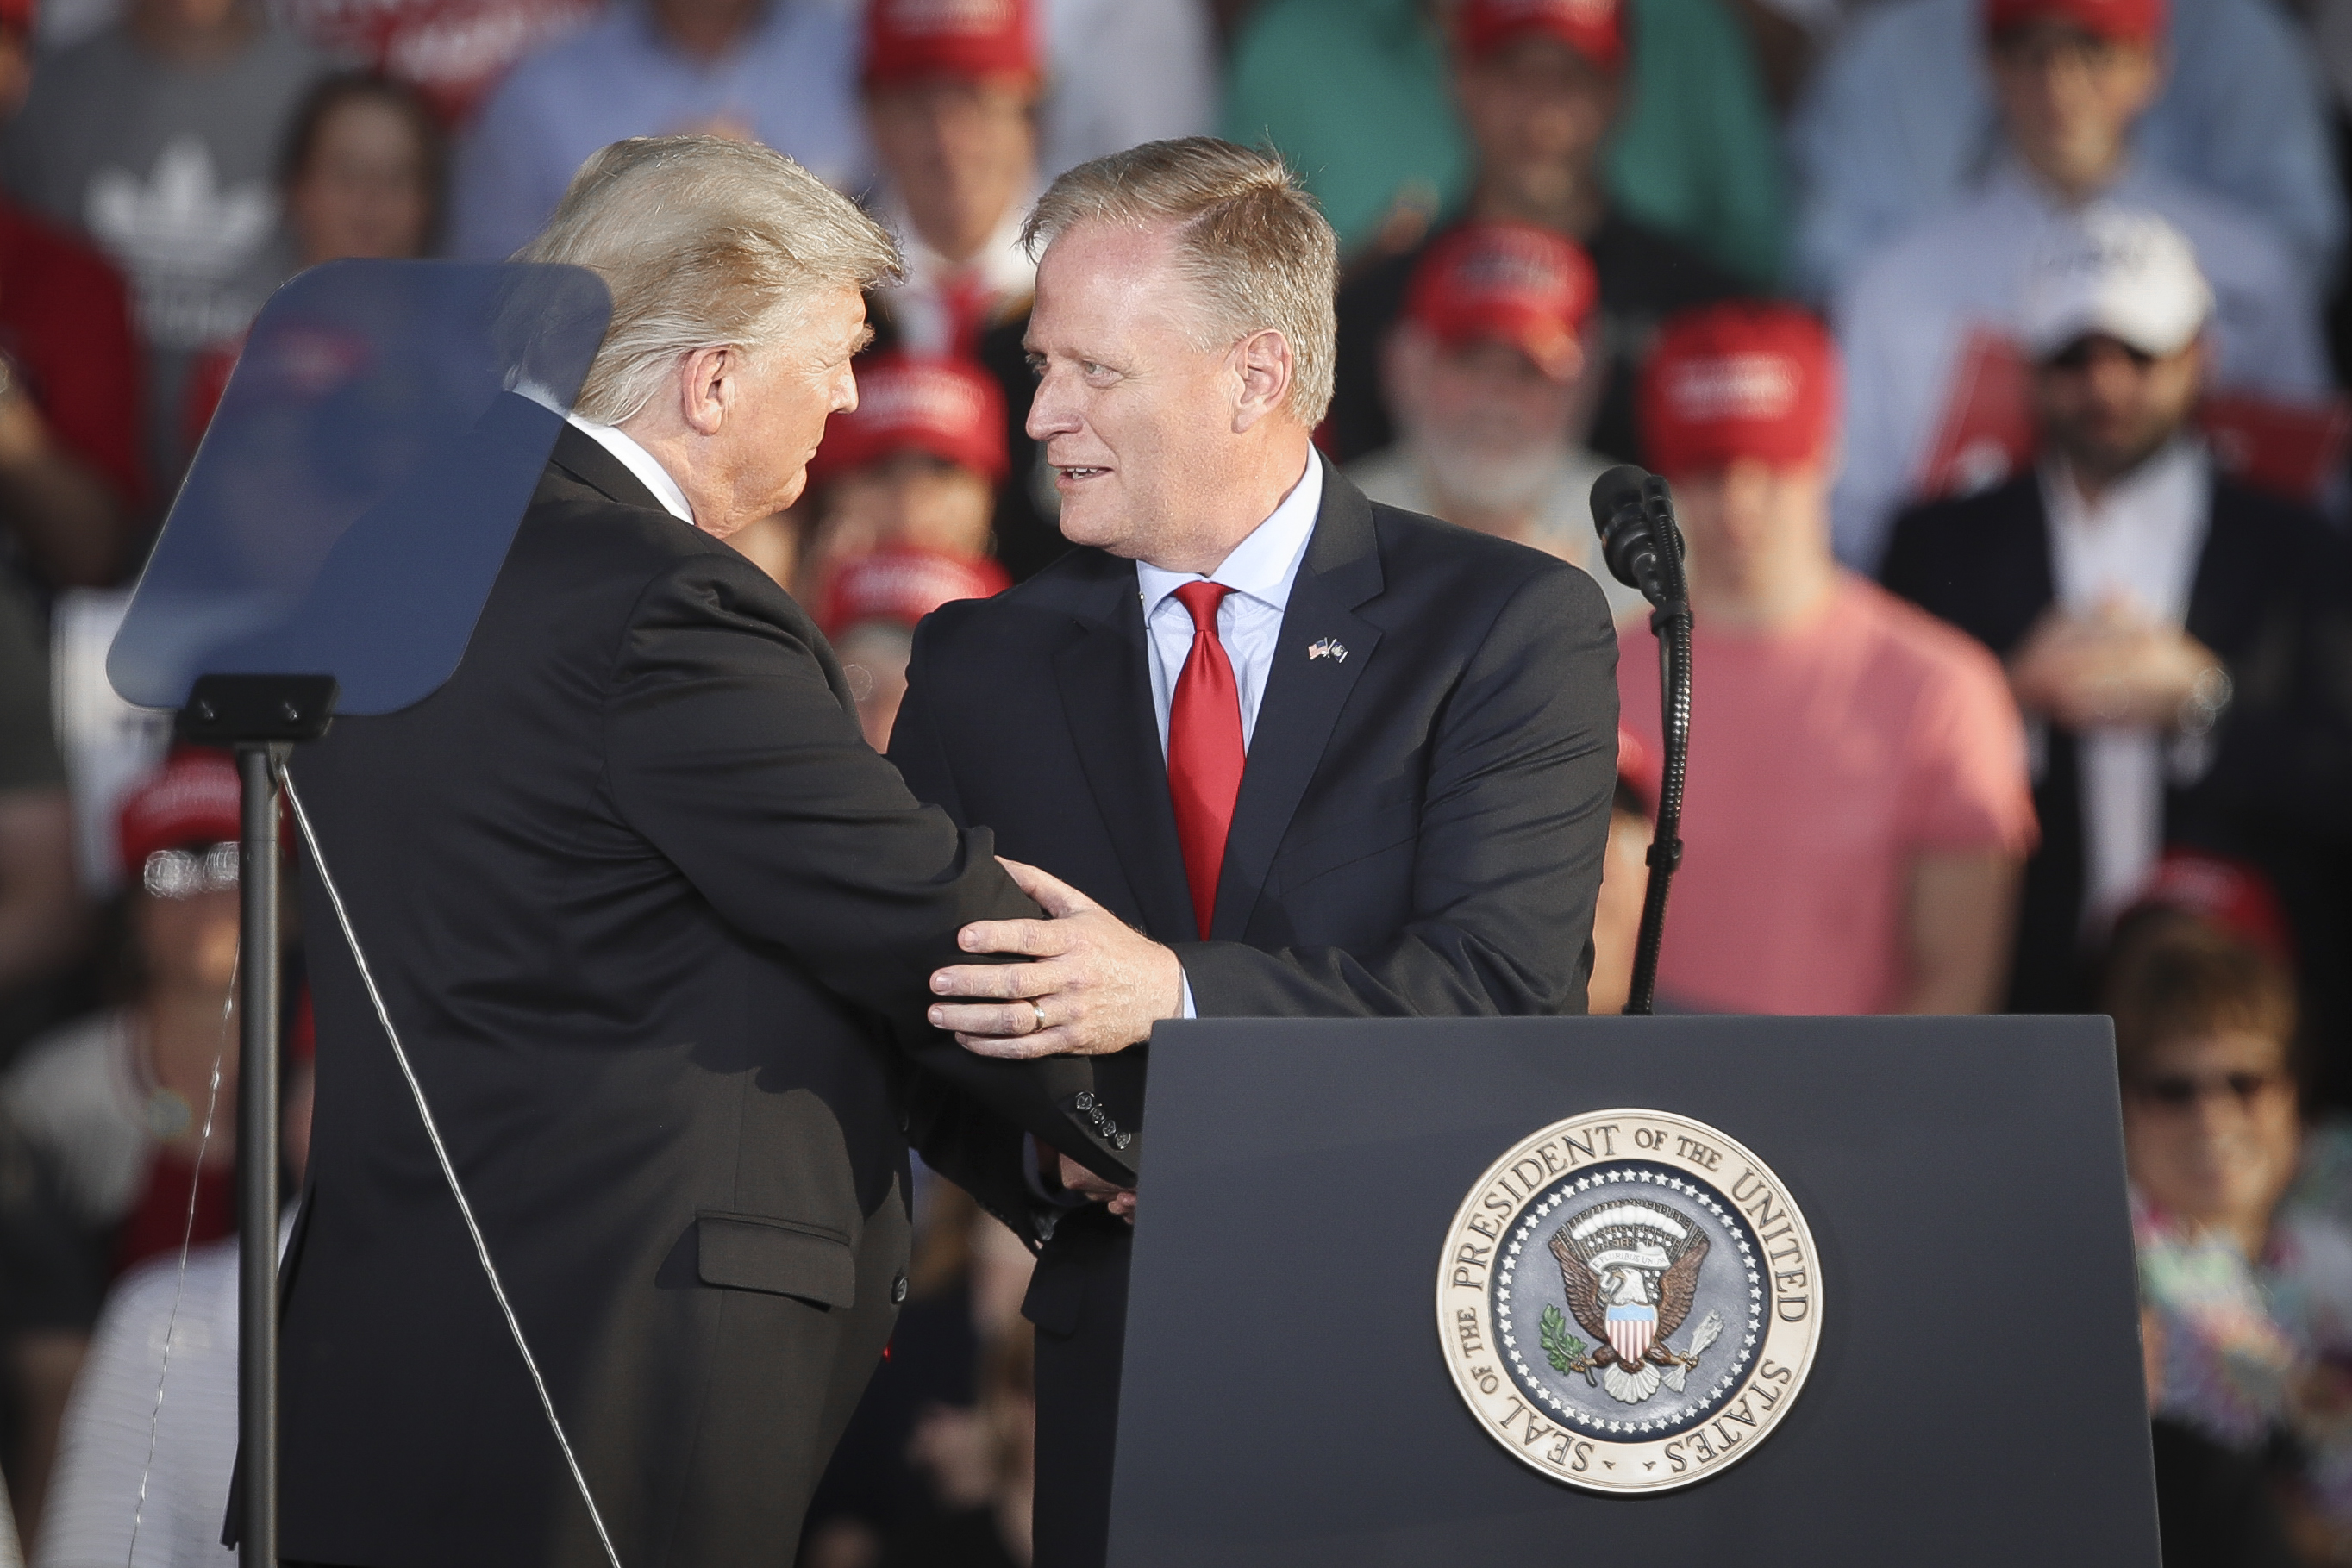 U.S. President Donald Trump shakes hands with Fred Keller, Republican candidate for Congress in Pennsylvania's 12th Congressional district, during a 'Make America Great Again' campaign rally at Williamsport Regional Airport, May 20, 2019 in Montoursville, Pennsylvania. (Photo by Drew Angerer/Getty Images)